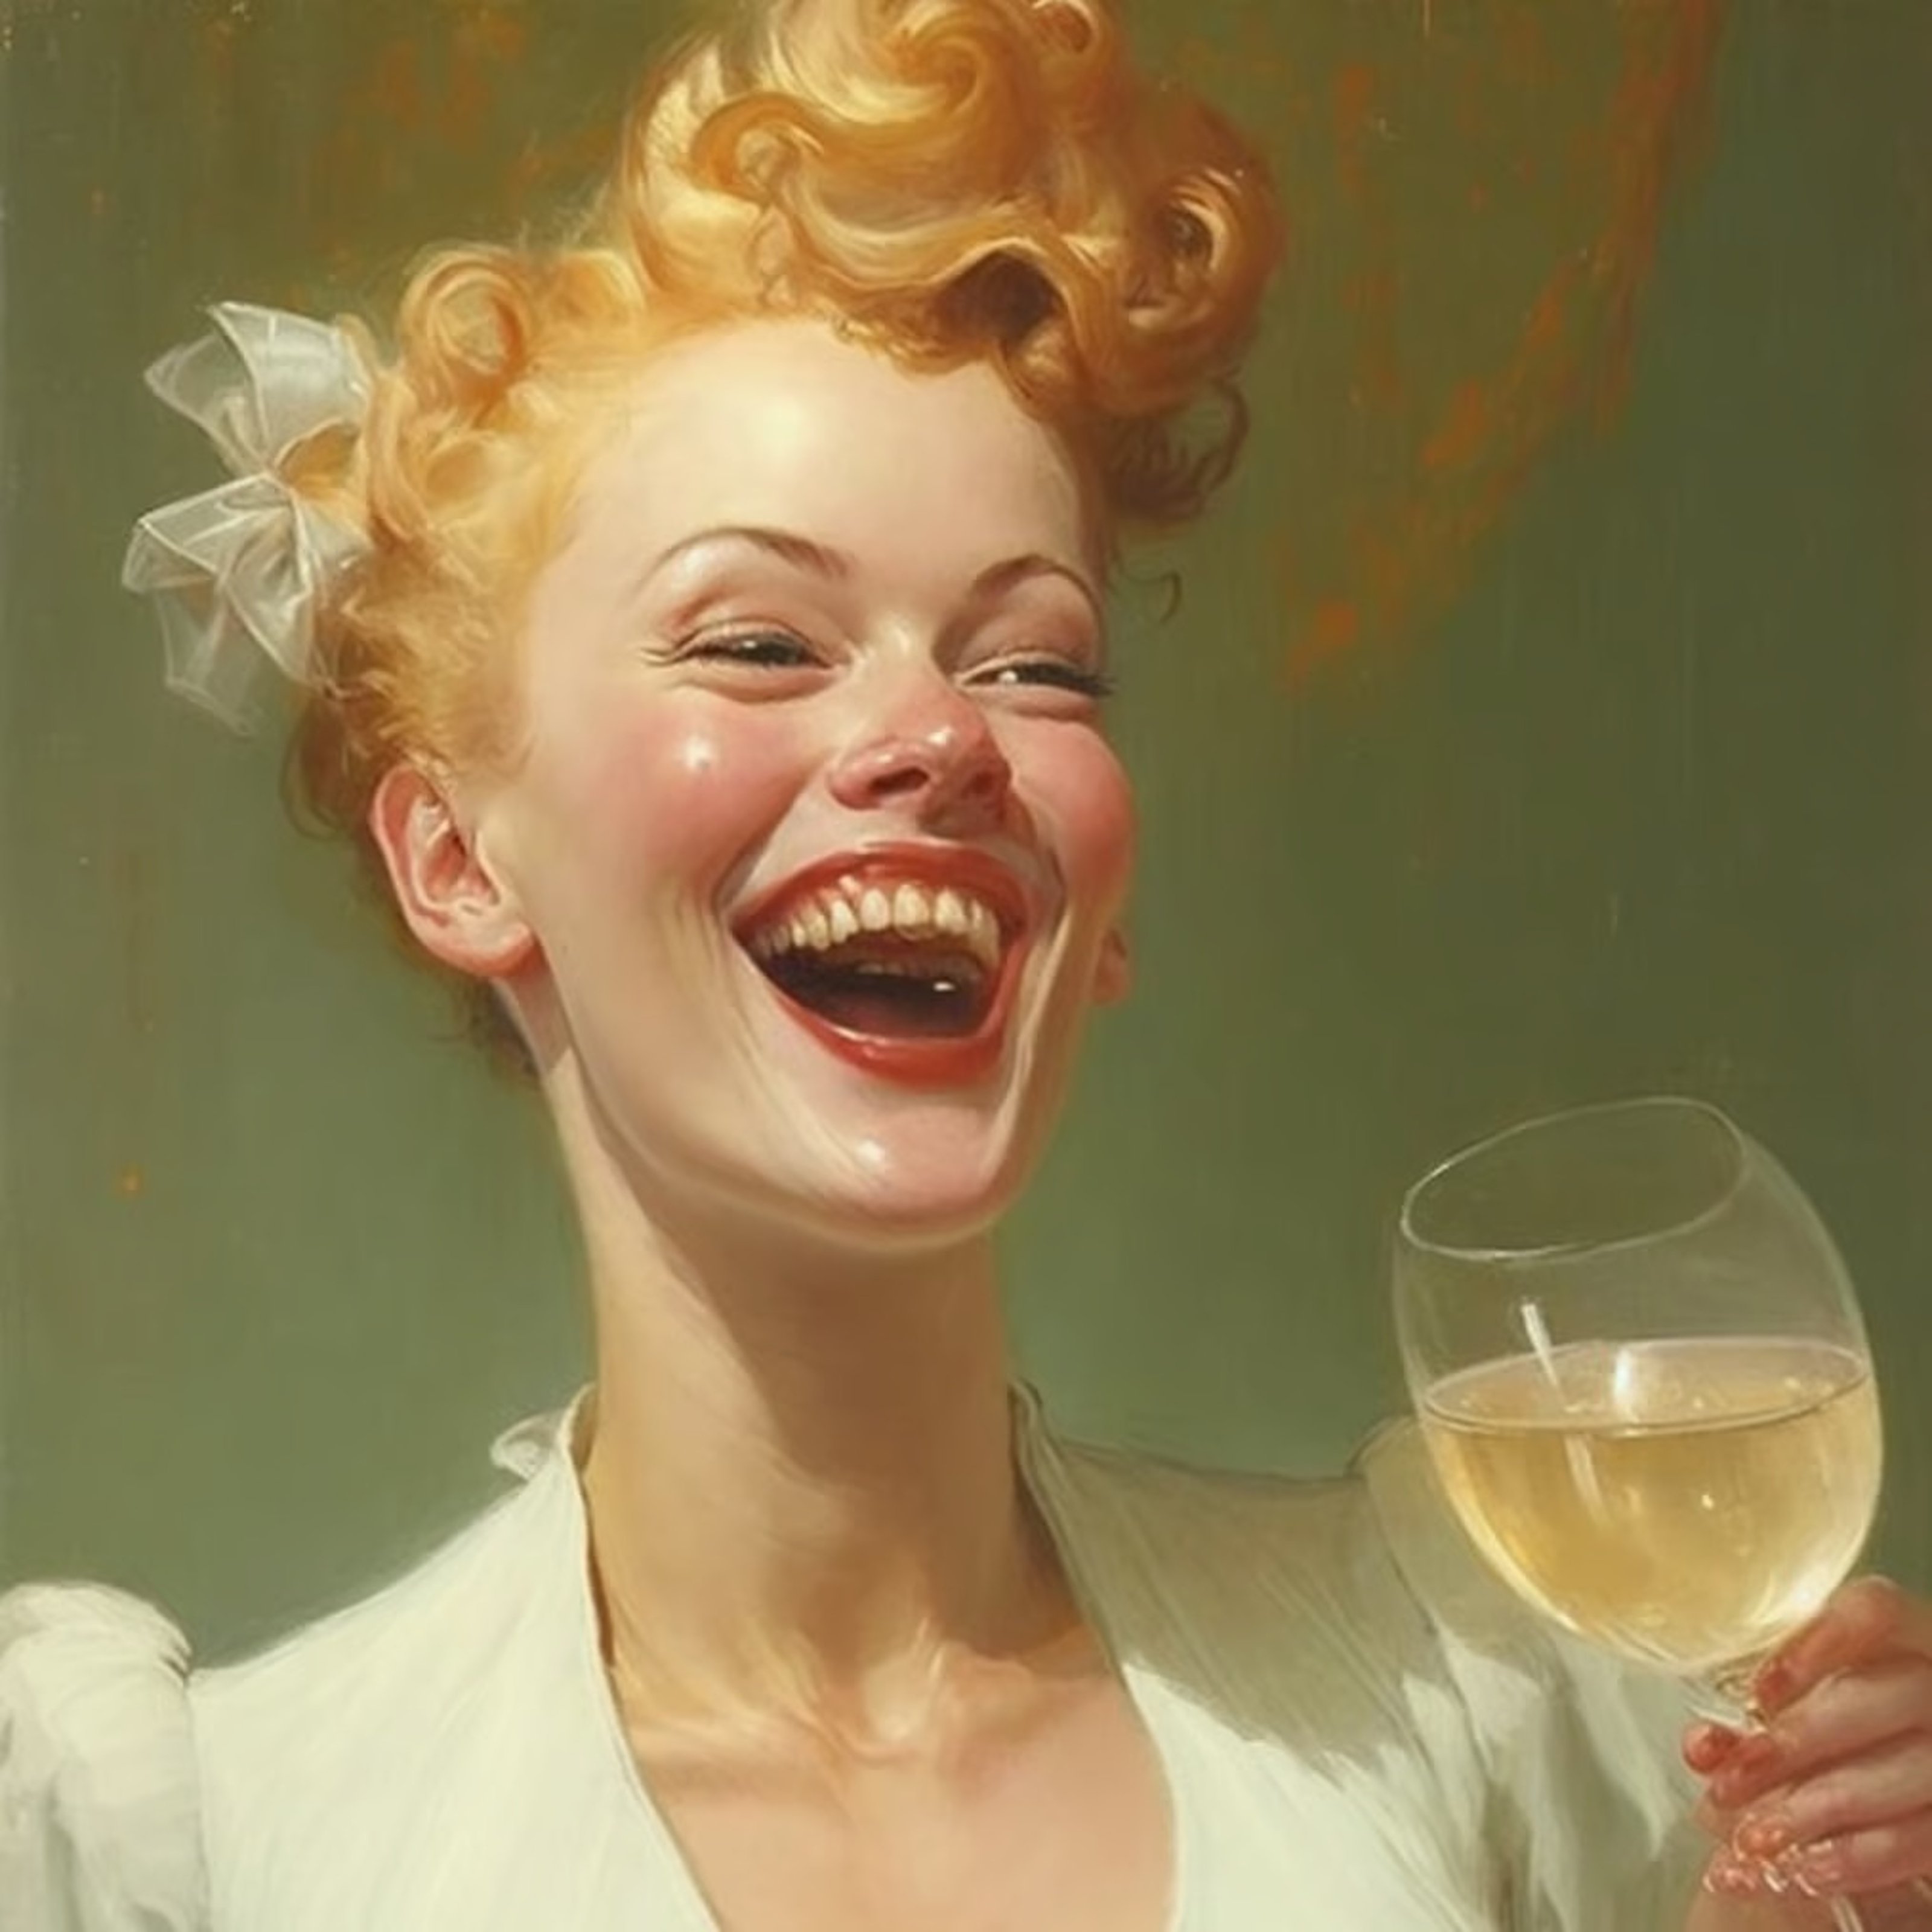 A female subject laughing, happy, delirious and drinking champagne.